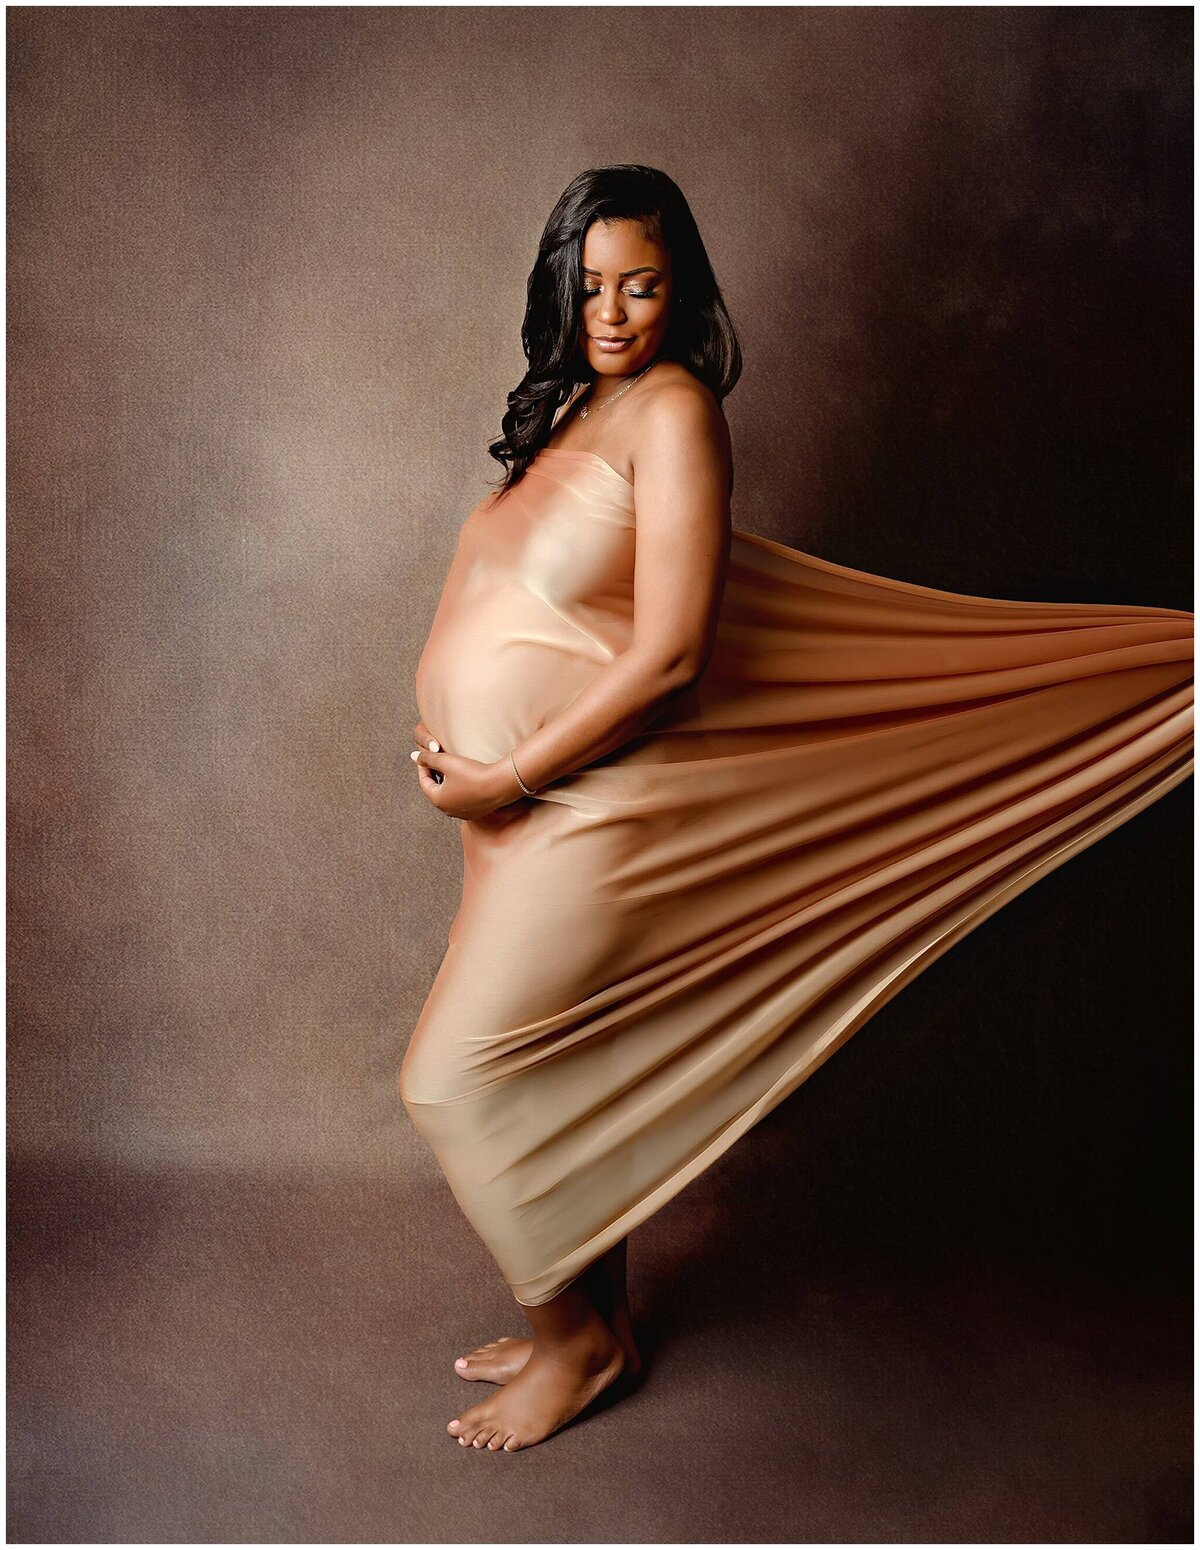 Woman holding her pregnant belly and looking down on the side while someone holds and pulls the fabric from the back creating a nice way to showcase her belly bump.